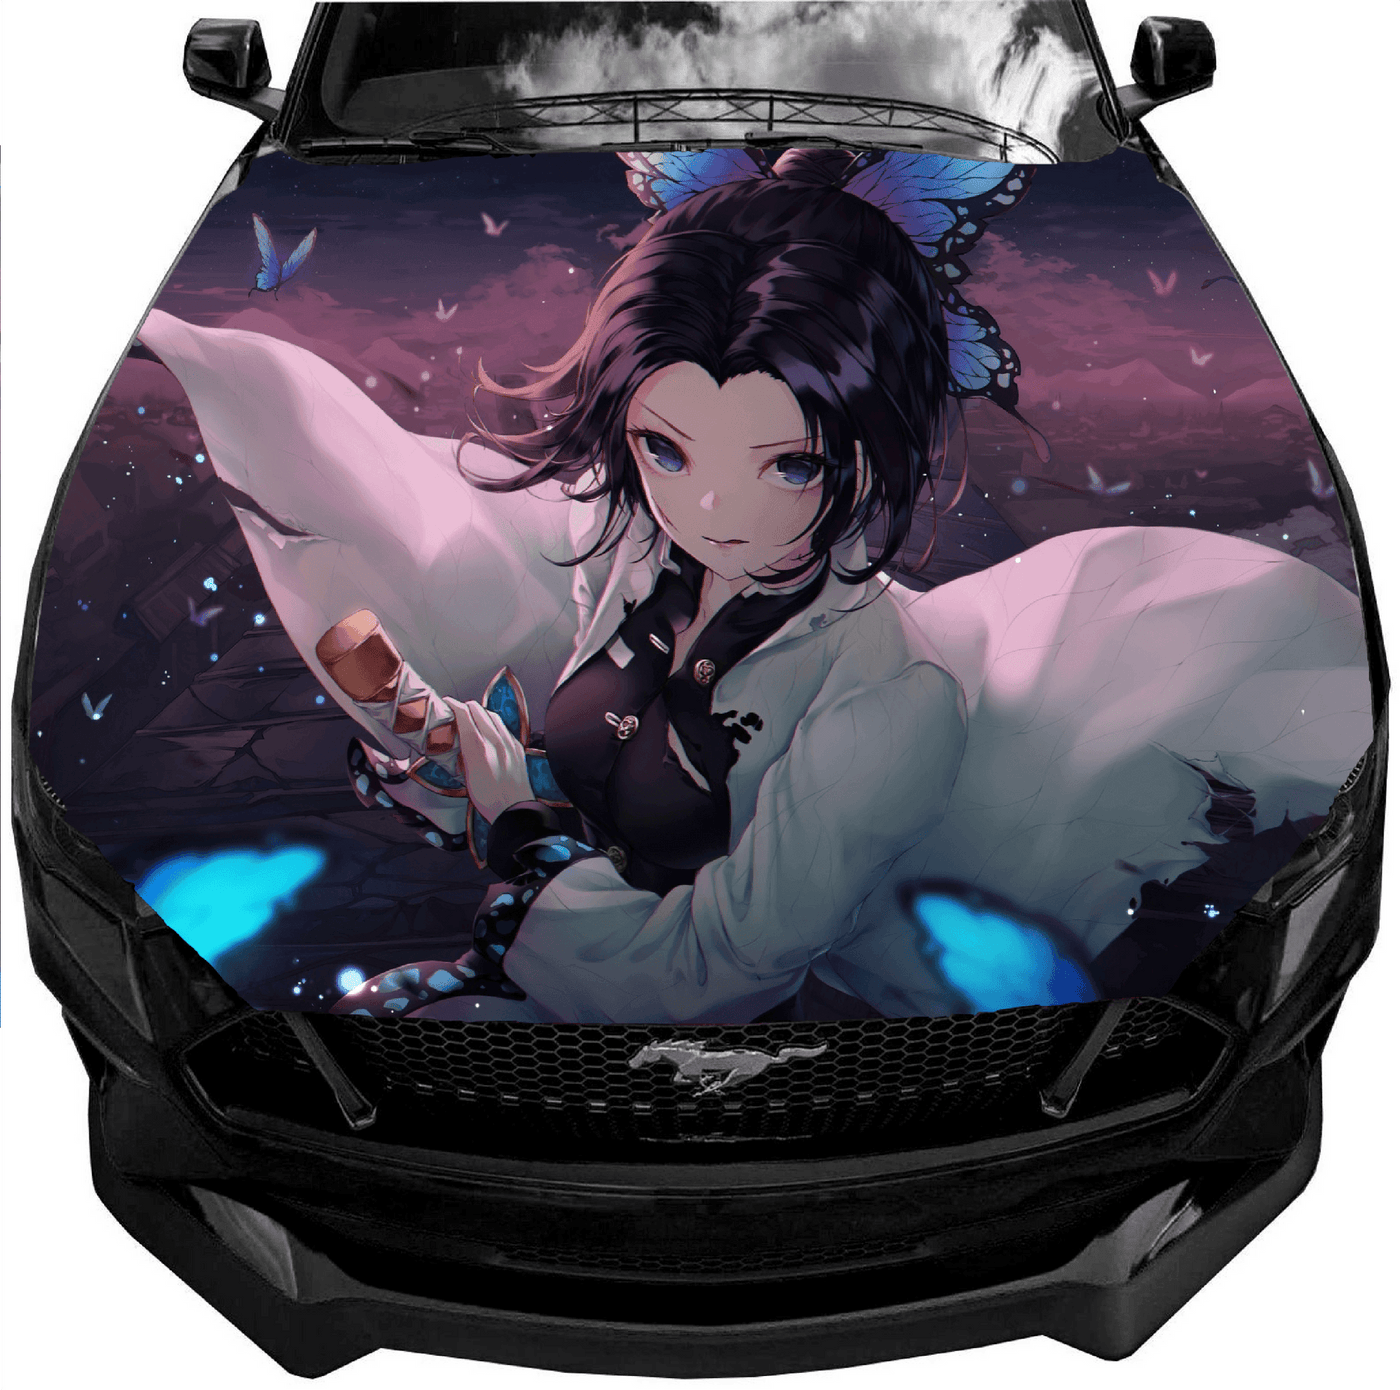 Japanese Anime Sexy Girl Car Side Full Wrap Sticker Car Decal Decorative  Cut Body Racing Graphic Decal Vinyl Wrap Beauty Design - AliExpress